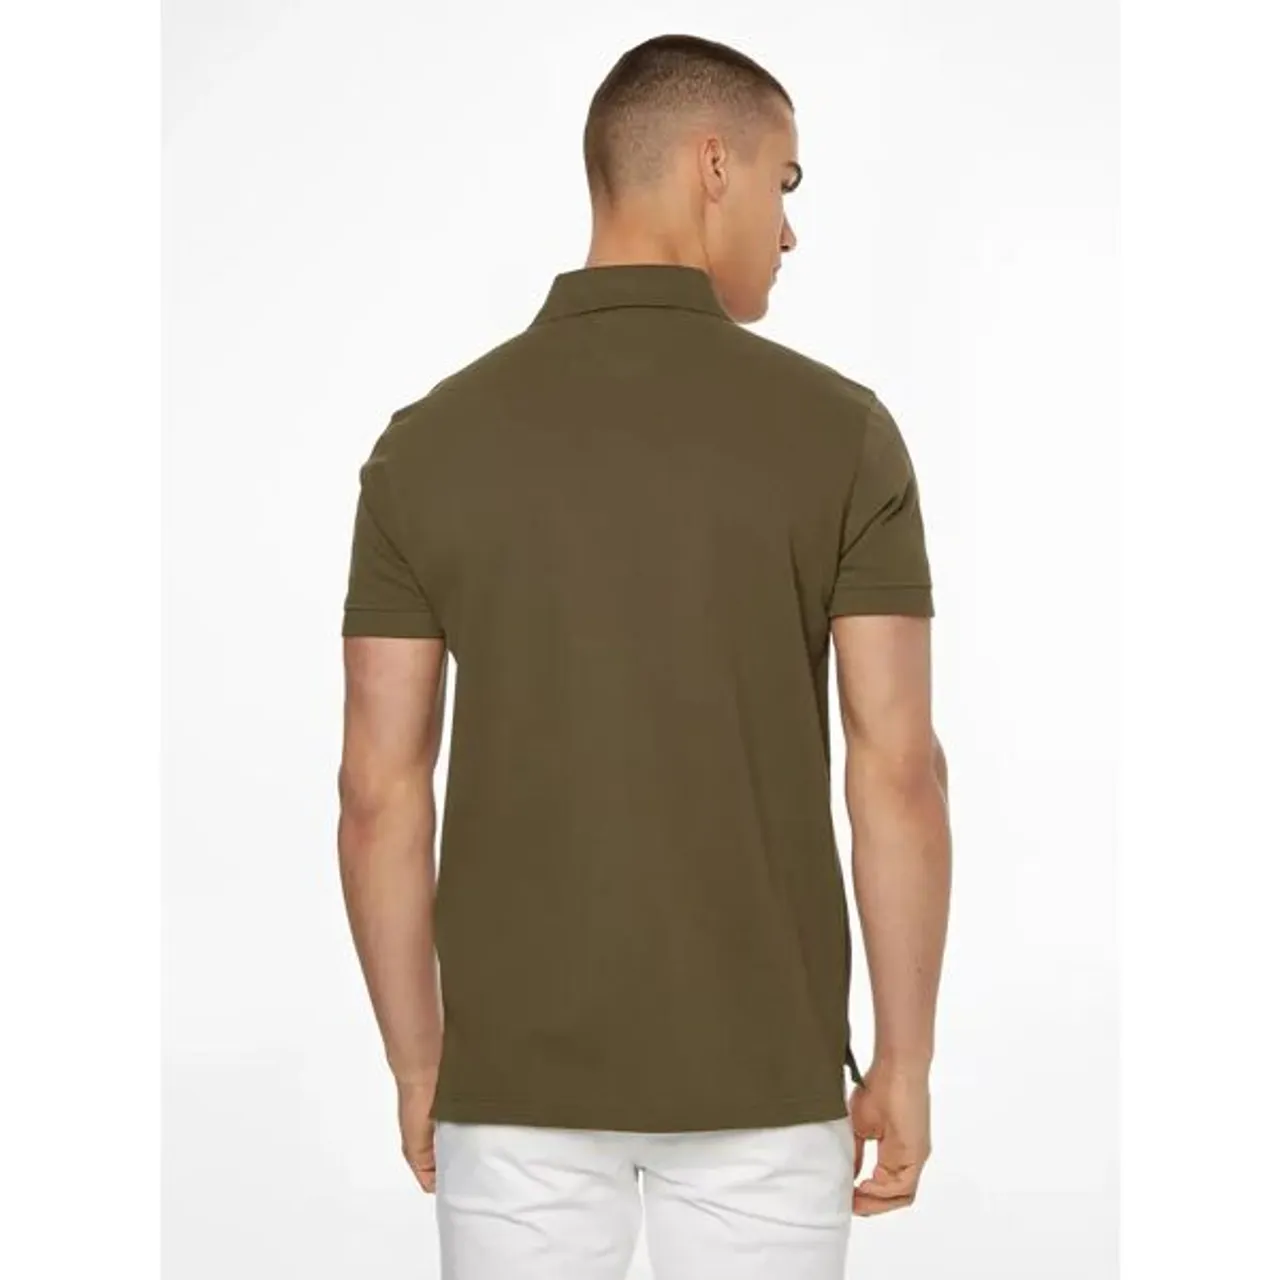 Tommy Hilfiger 1985 Regular Fit Polo Shirt - Army Green - Male